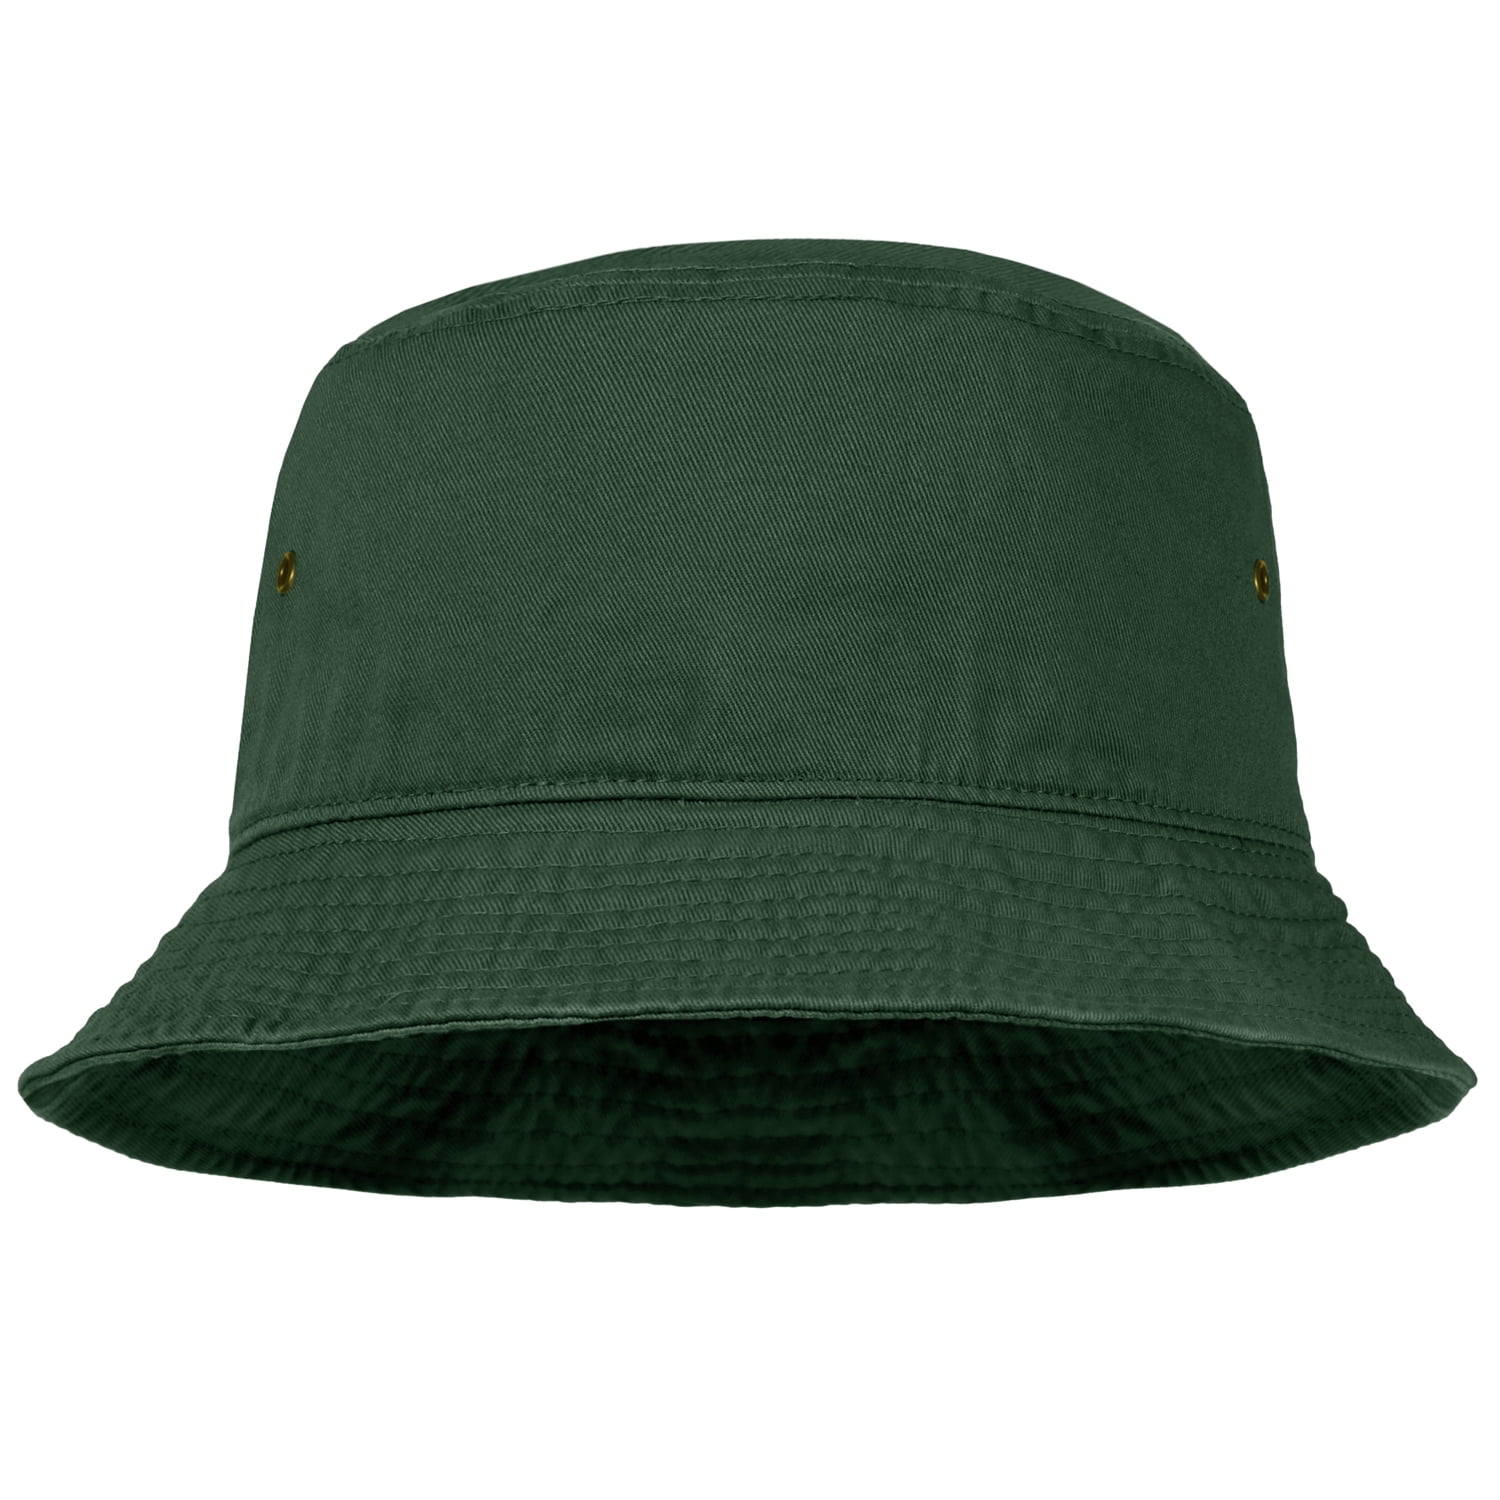 Foldable Army Green Bucket Hat Unisex Outdoor Sunhat For Hiking, Climbing,  Hunting, Fishing Adjustable And Stylish Draw 283P From Nxink, $21.01